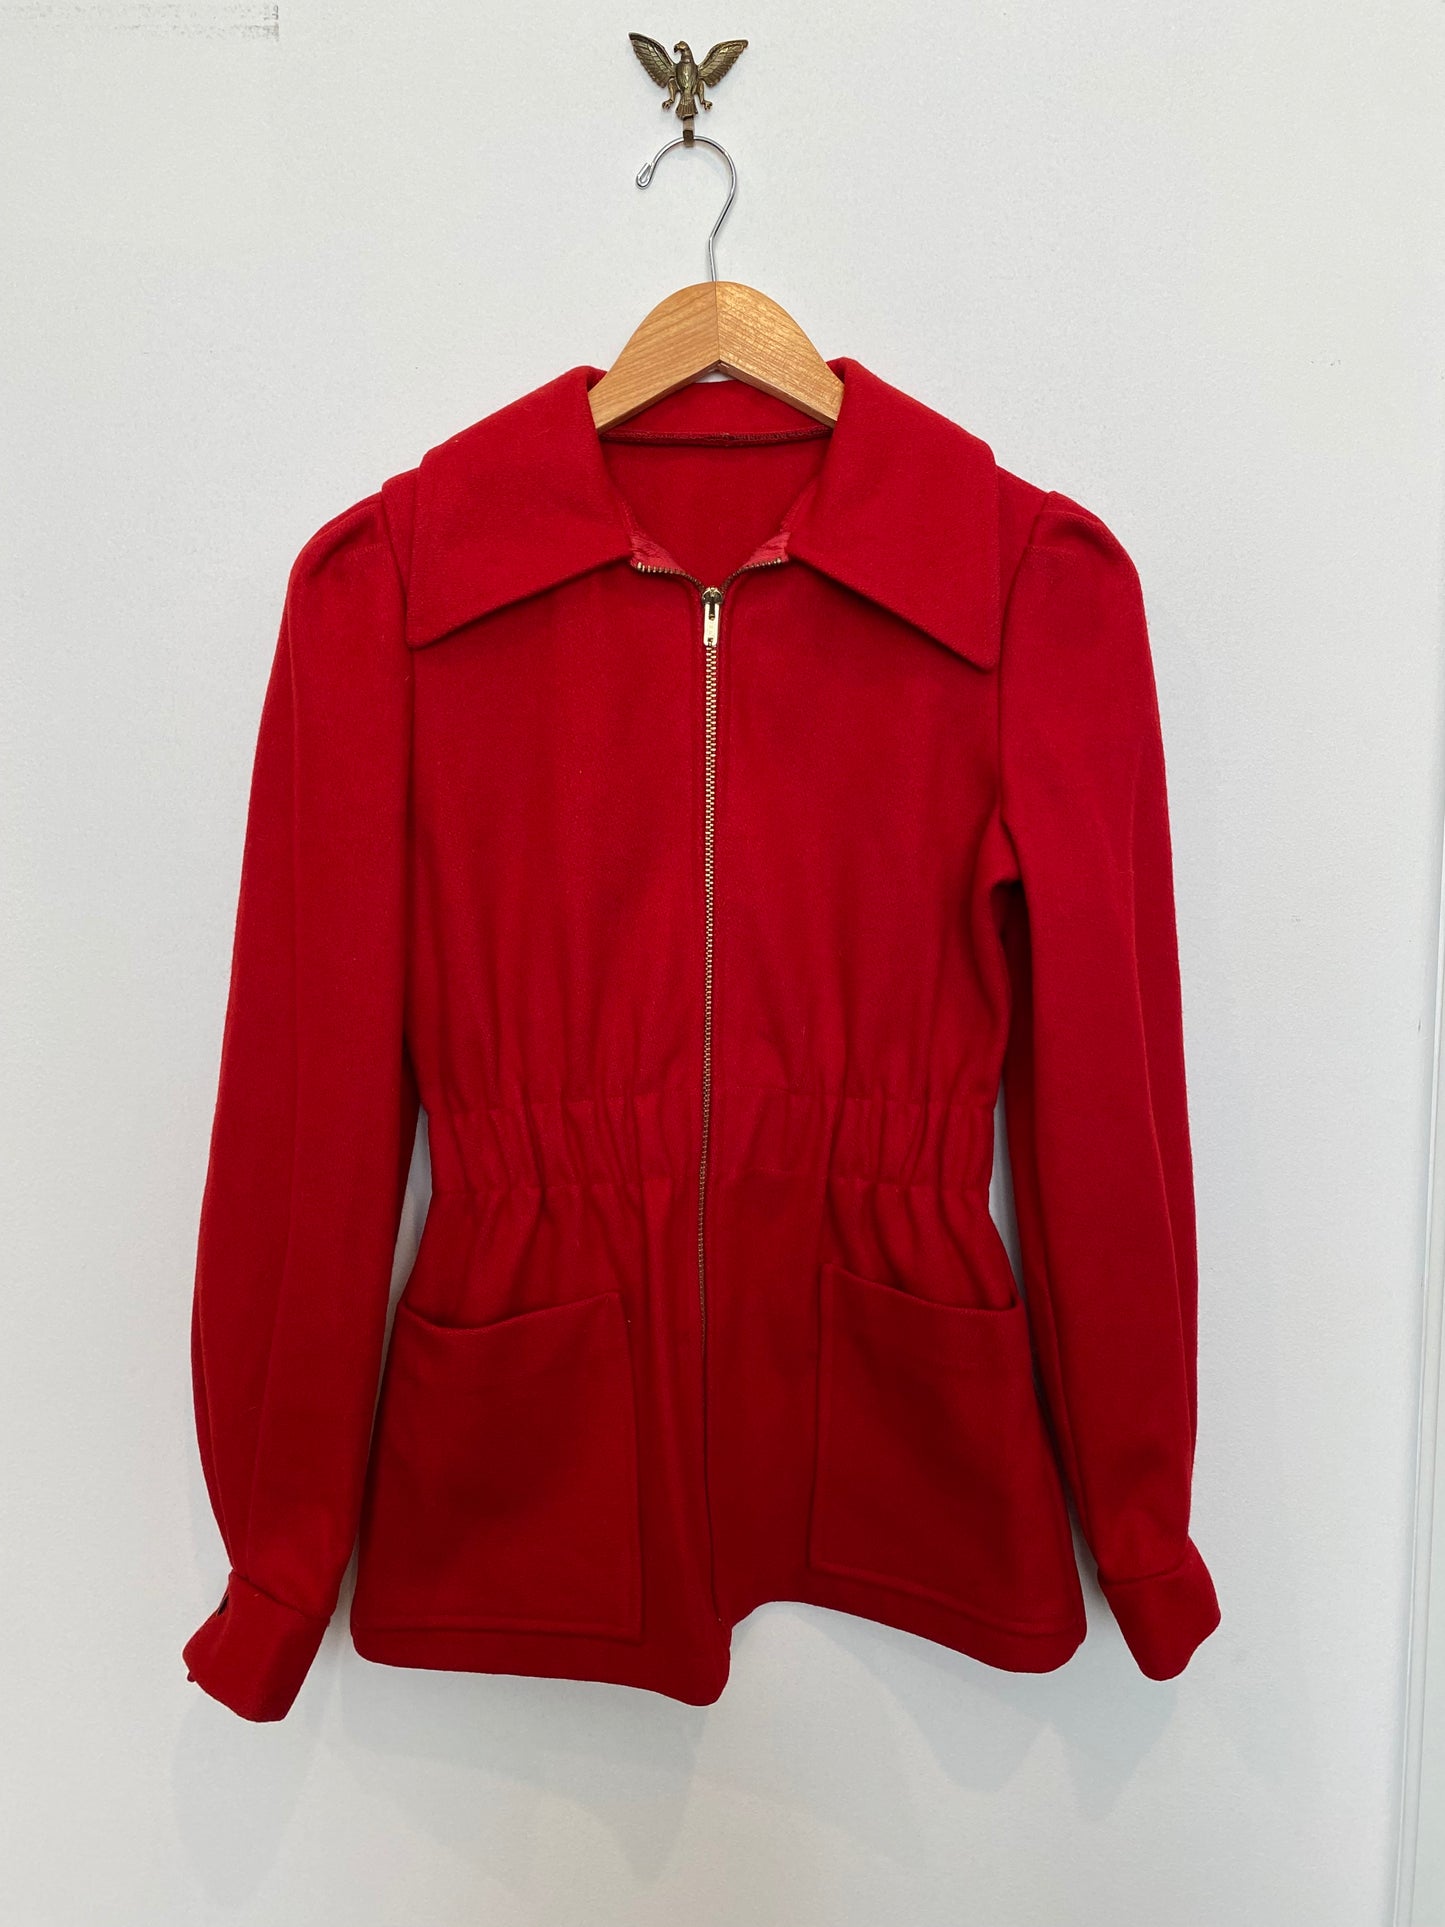 1940s Cherry Red Wool Outerwear Jacket- S/M